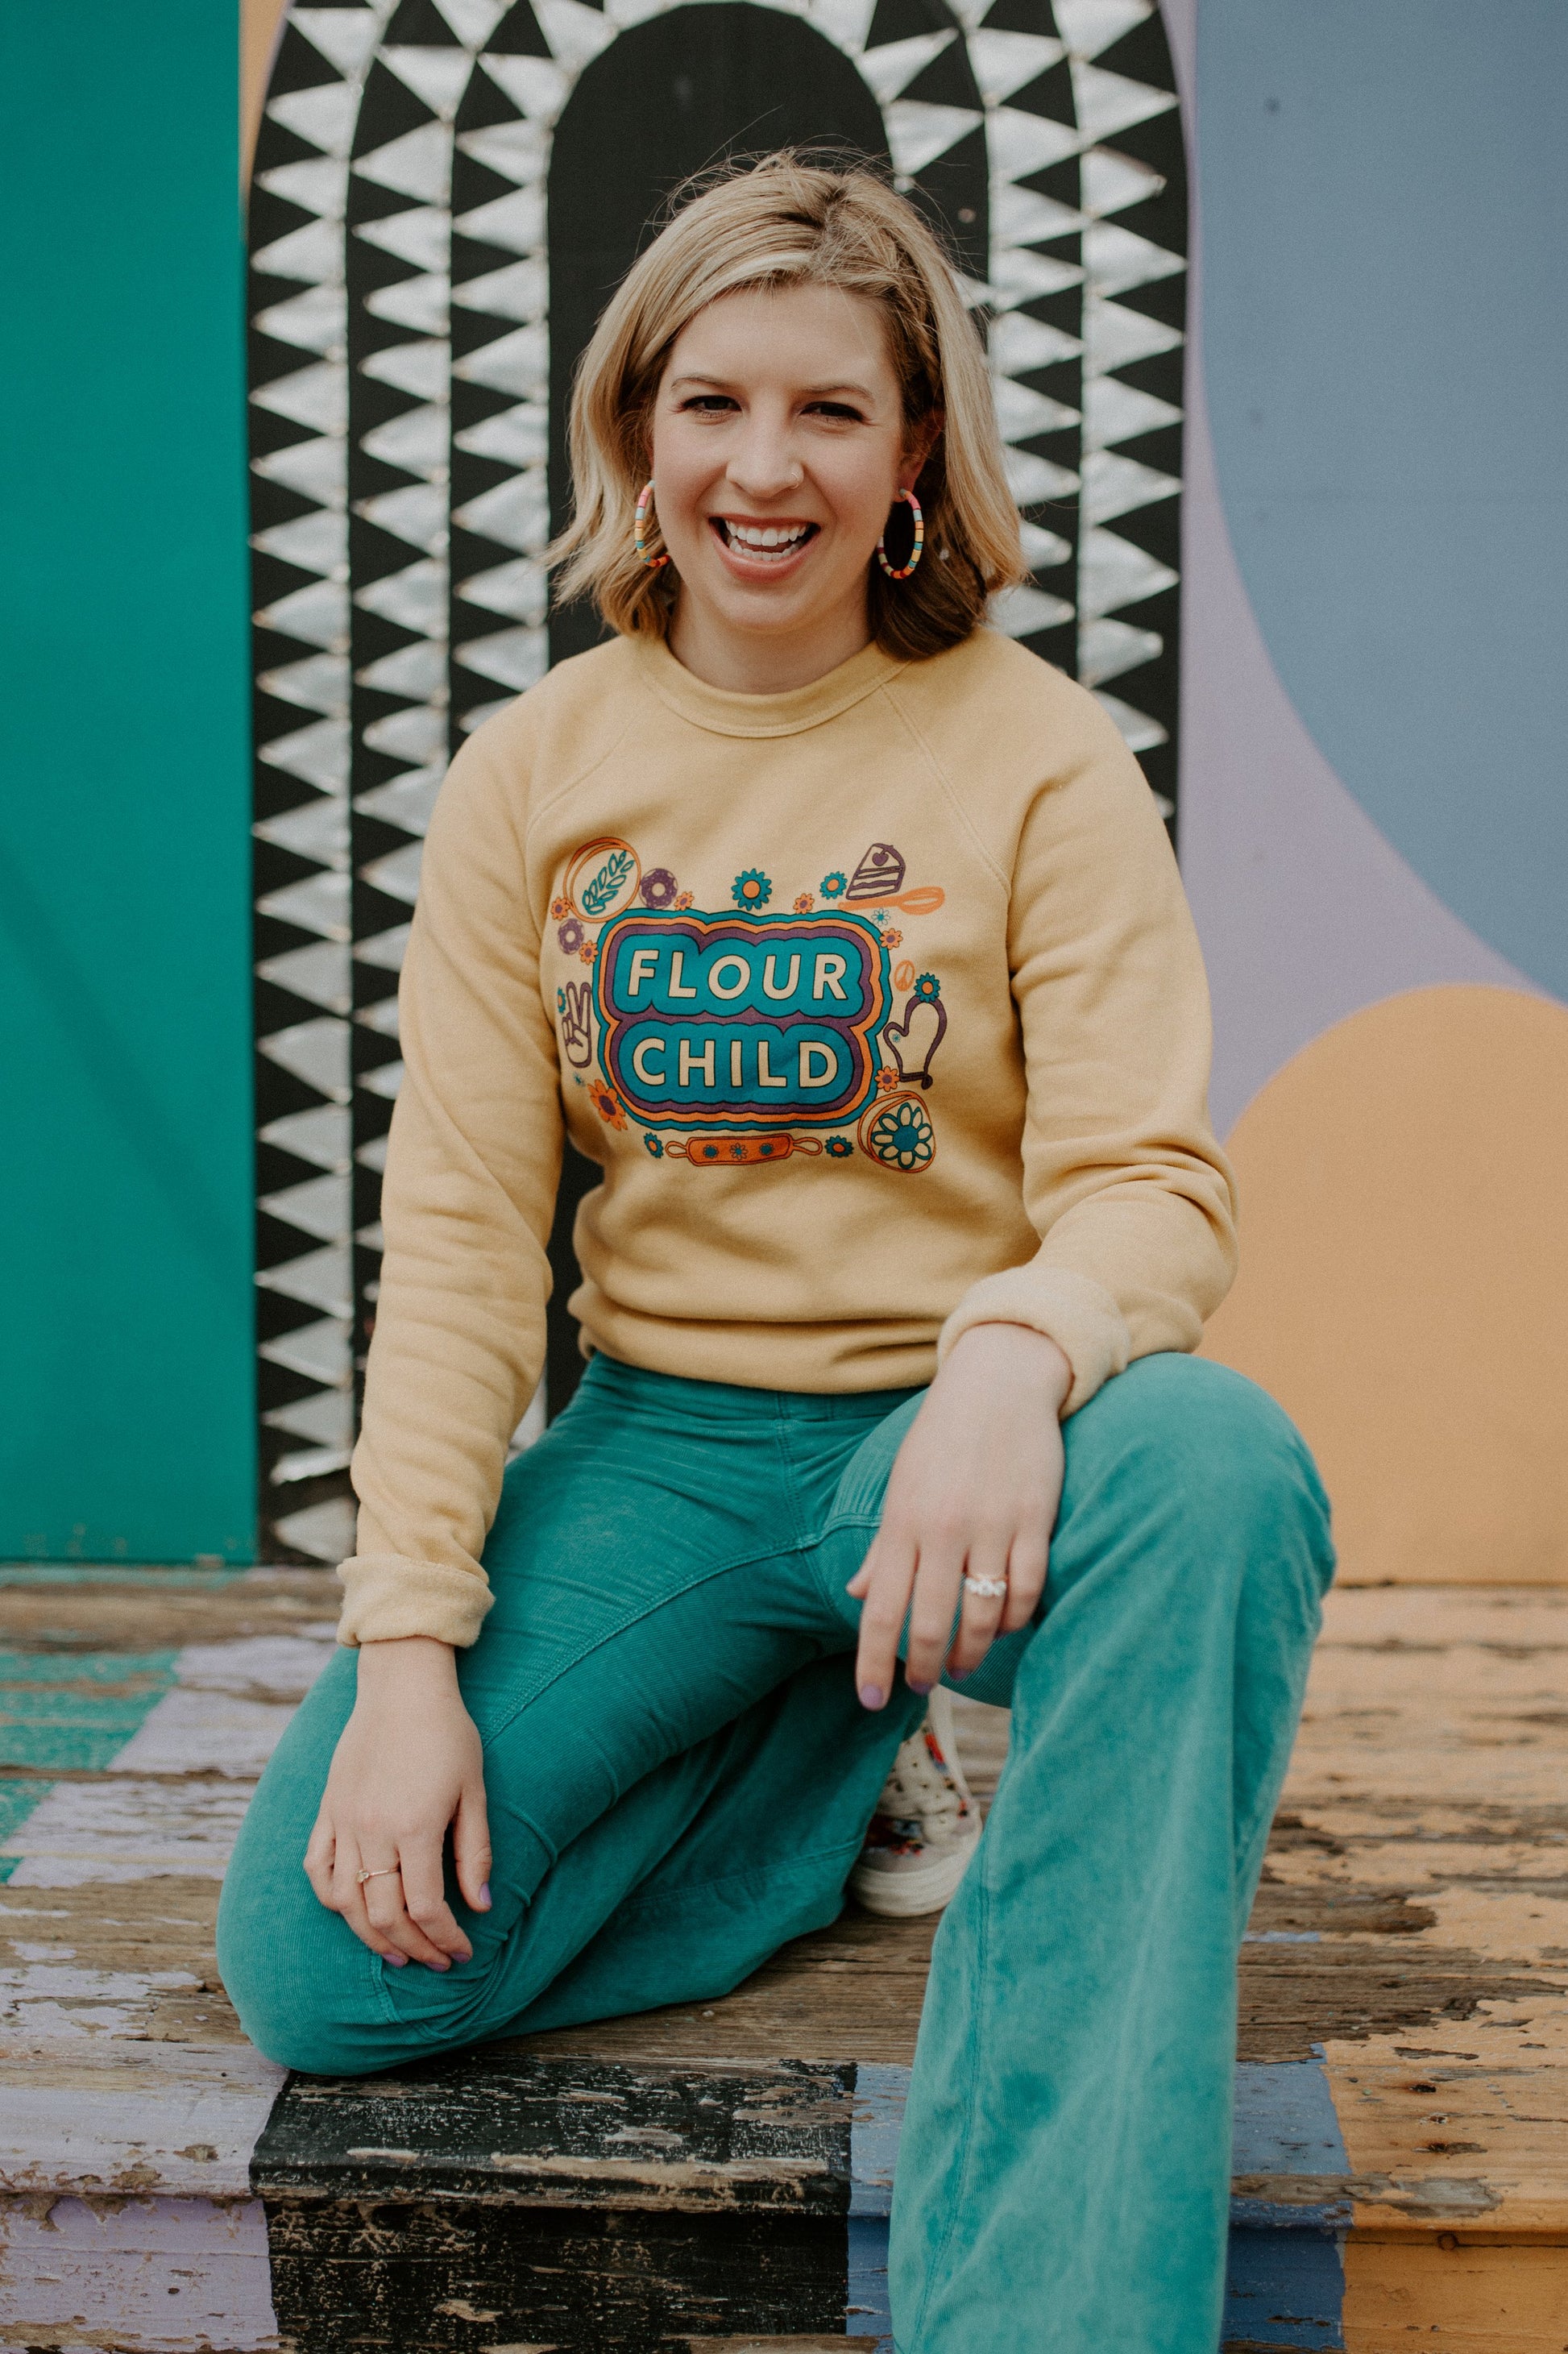 A woman in a bright yellow Flour Child sweatshirt and green pants laughing in front of a mural